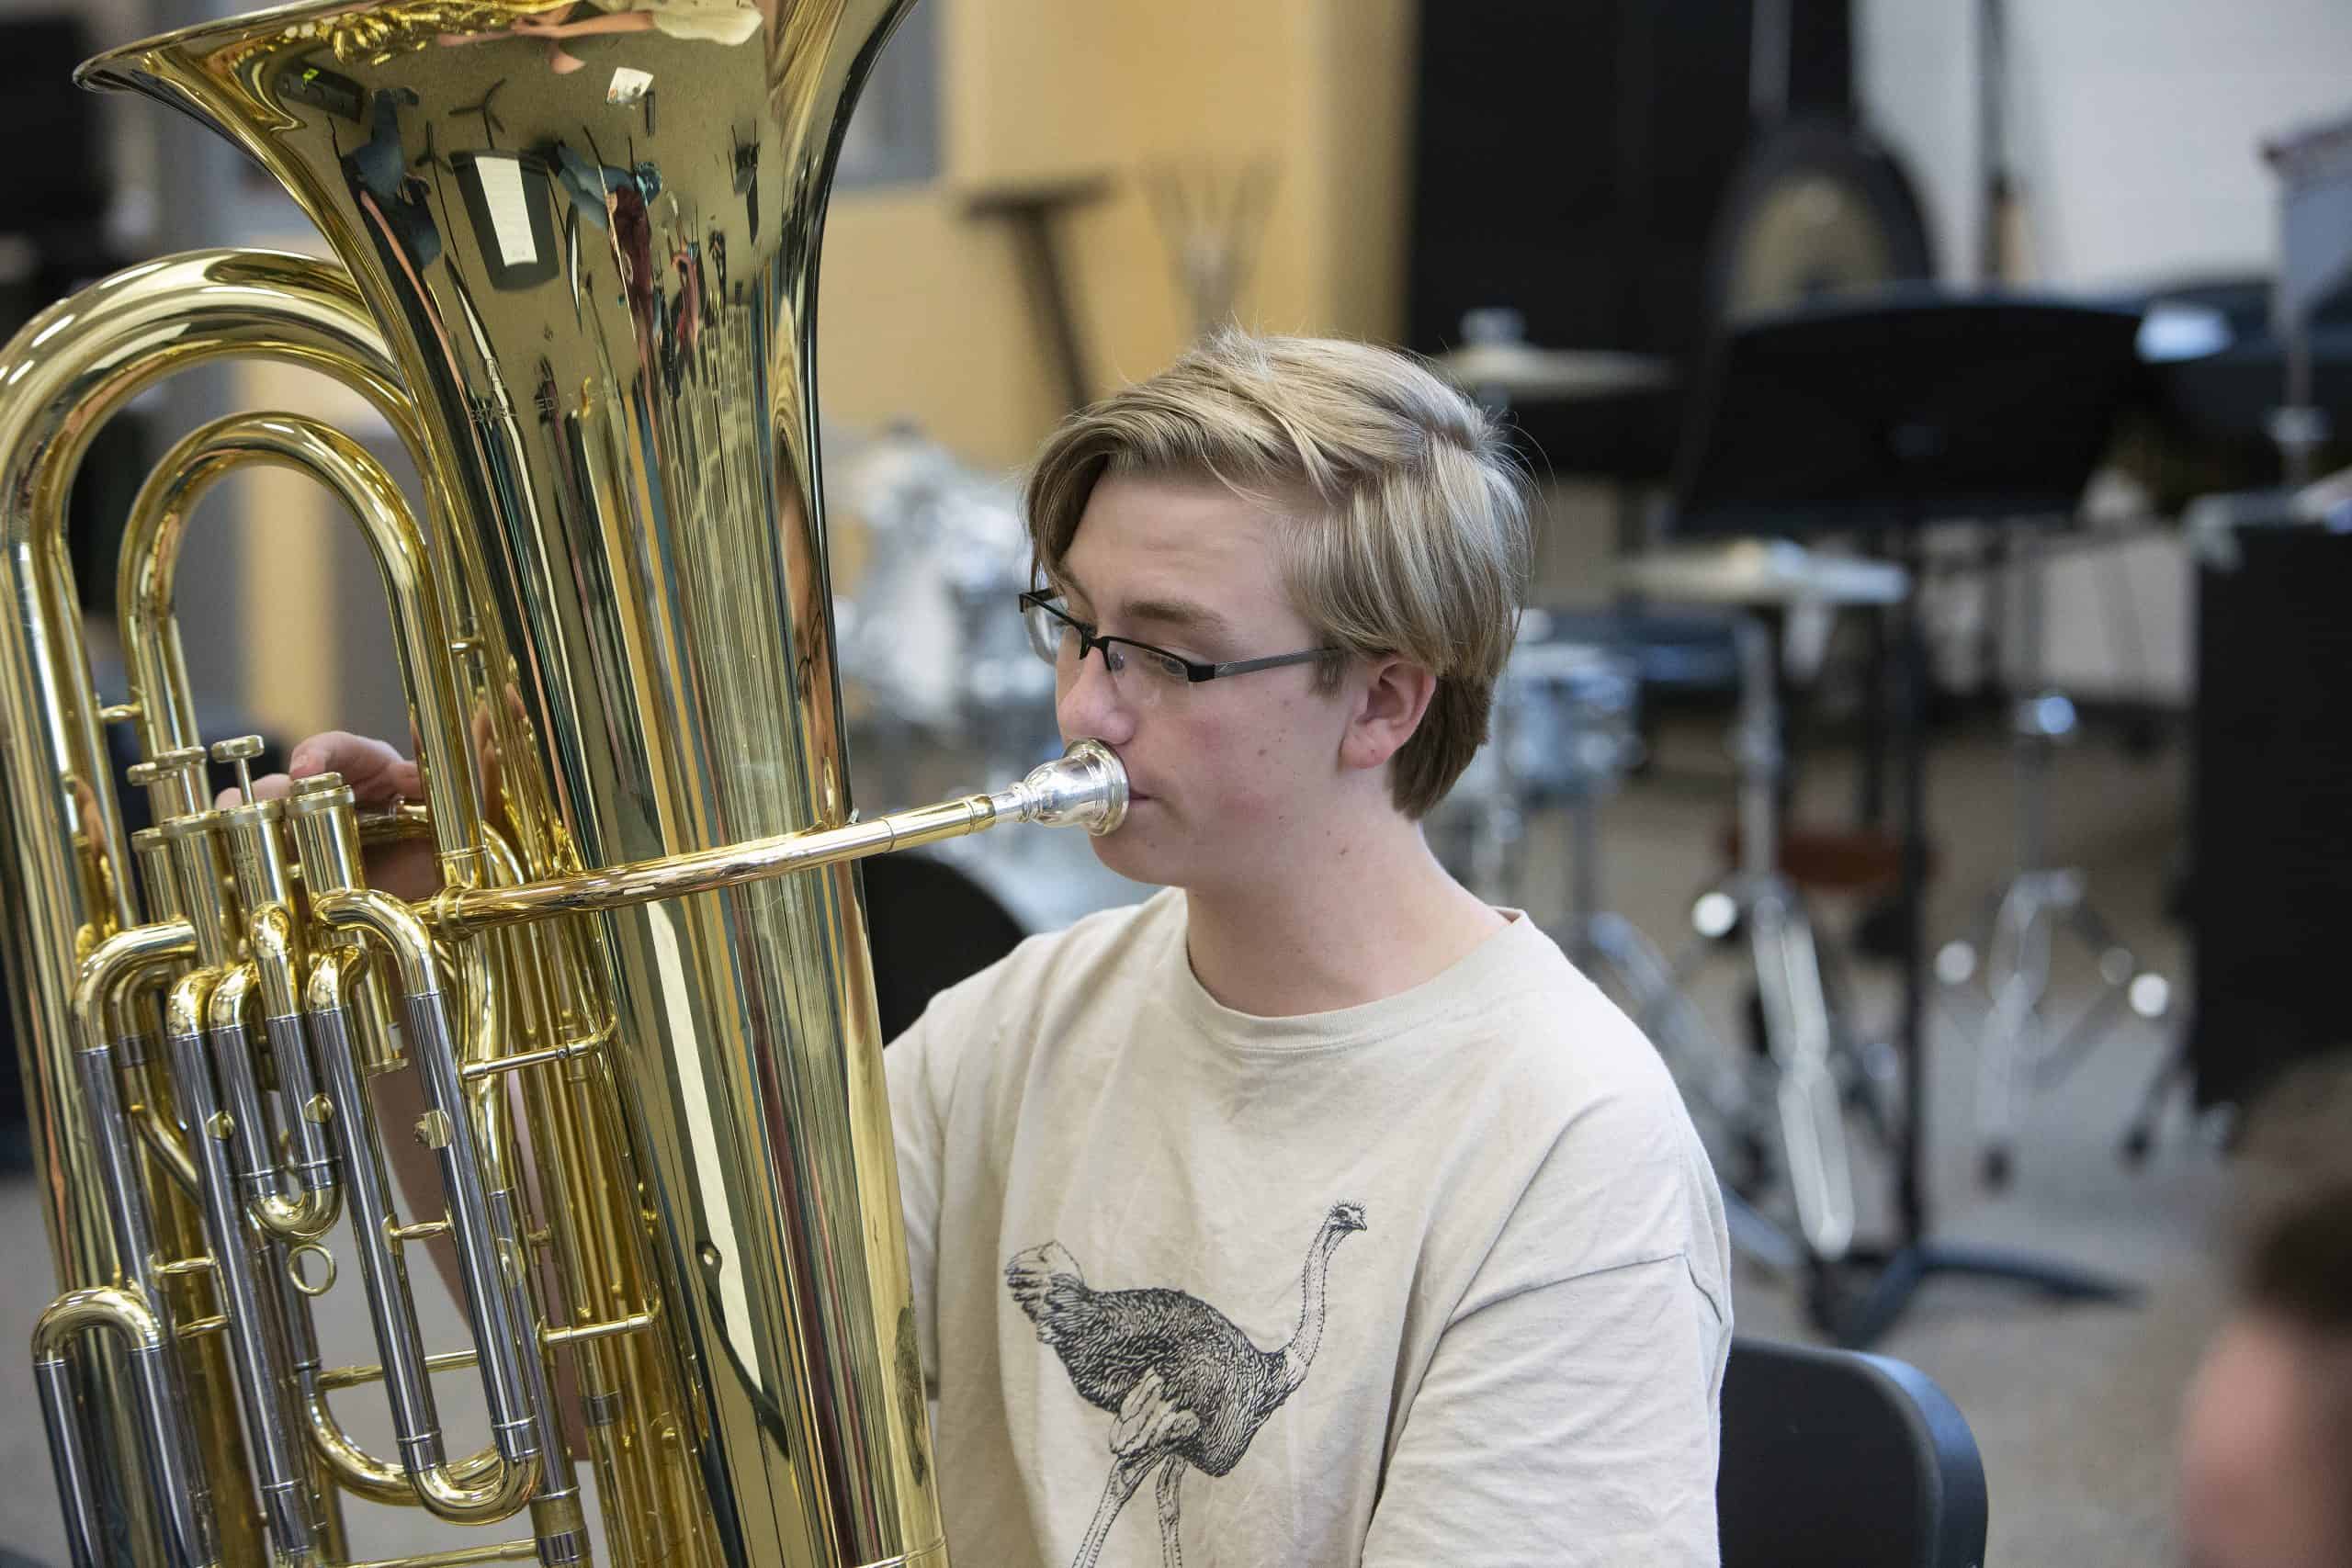 Male student playing the tuba